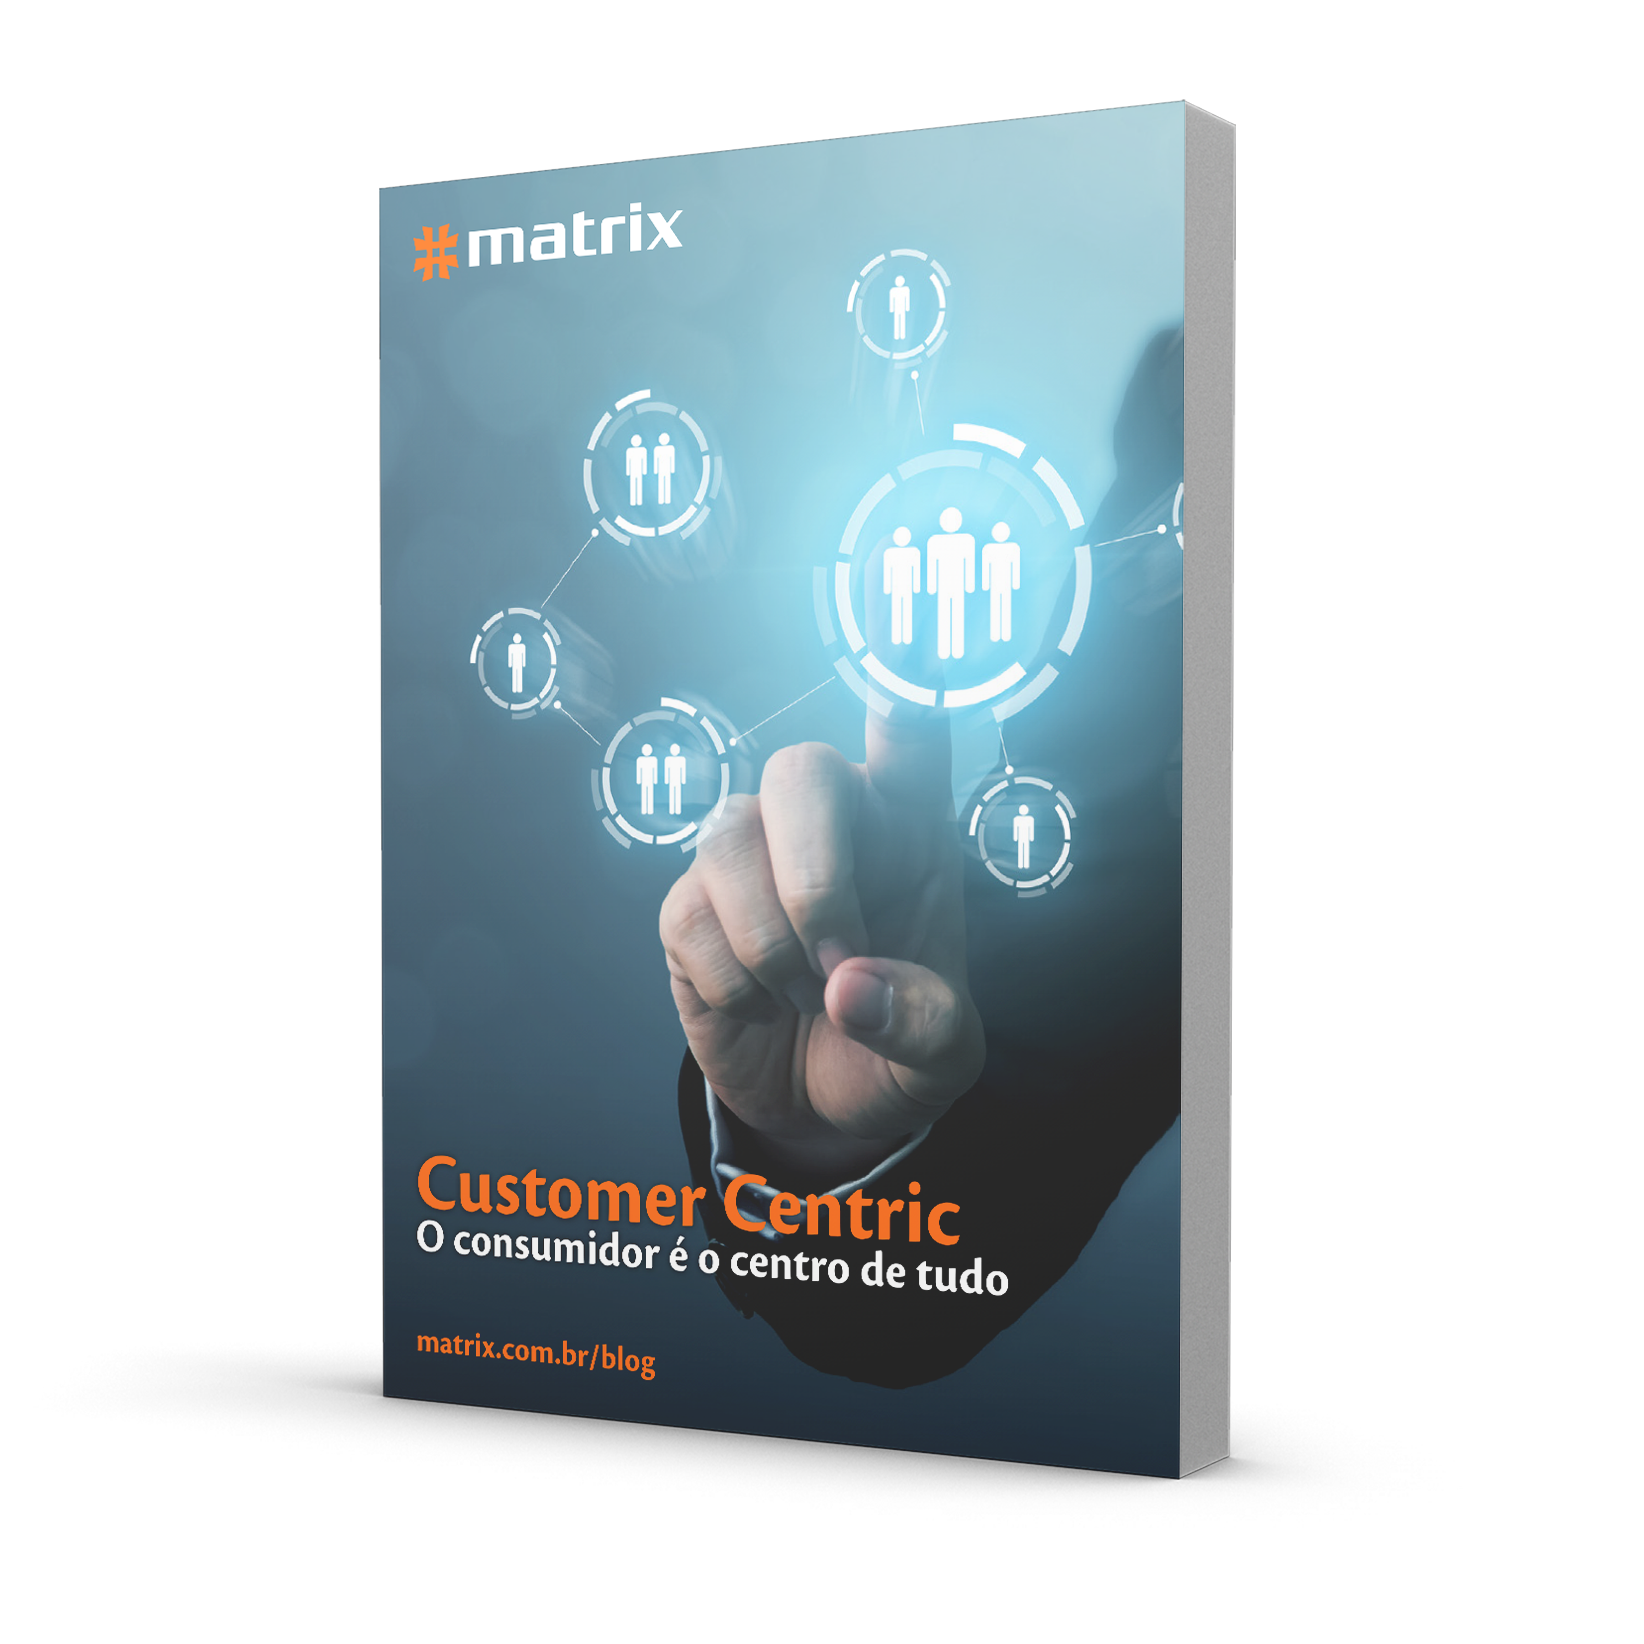 Customer Centric: the consumer is the center of everything